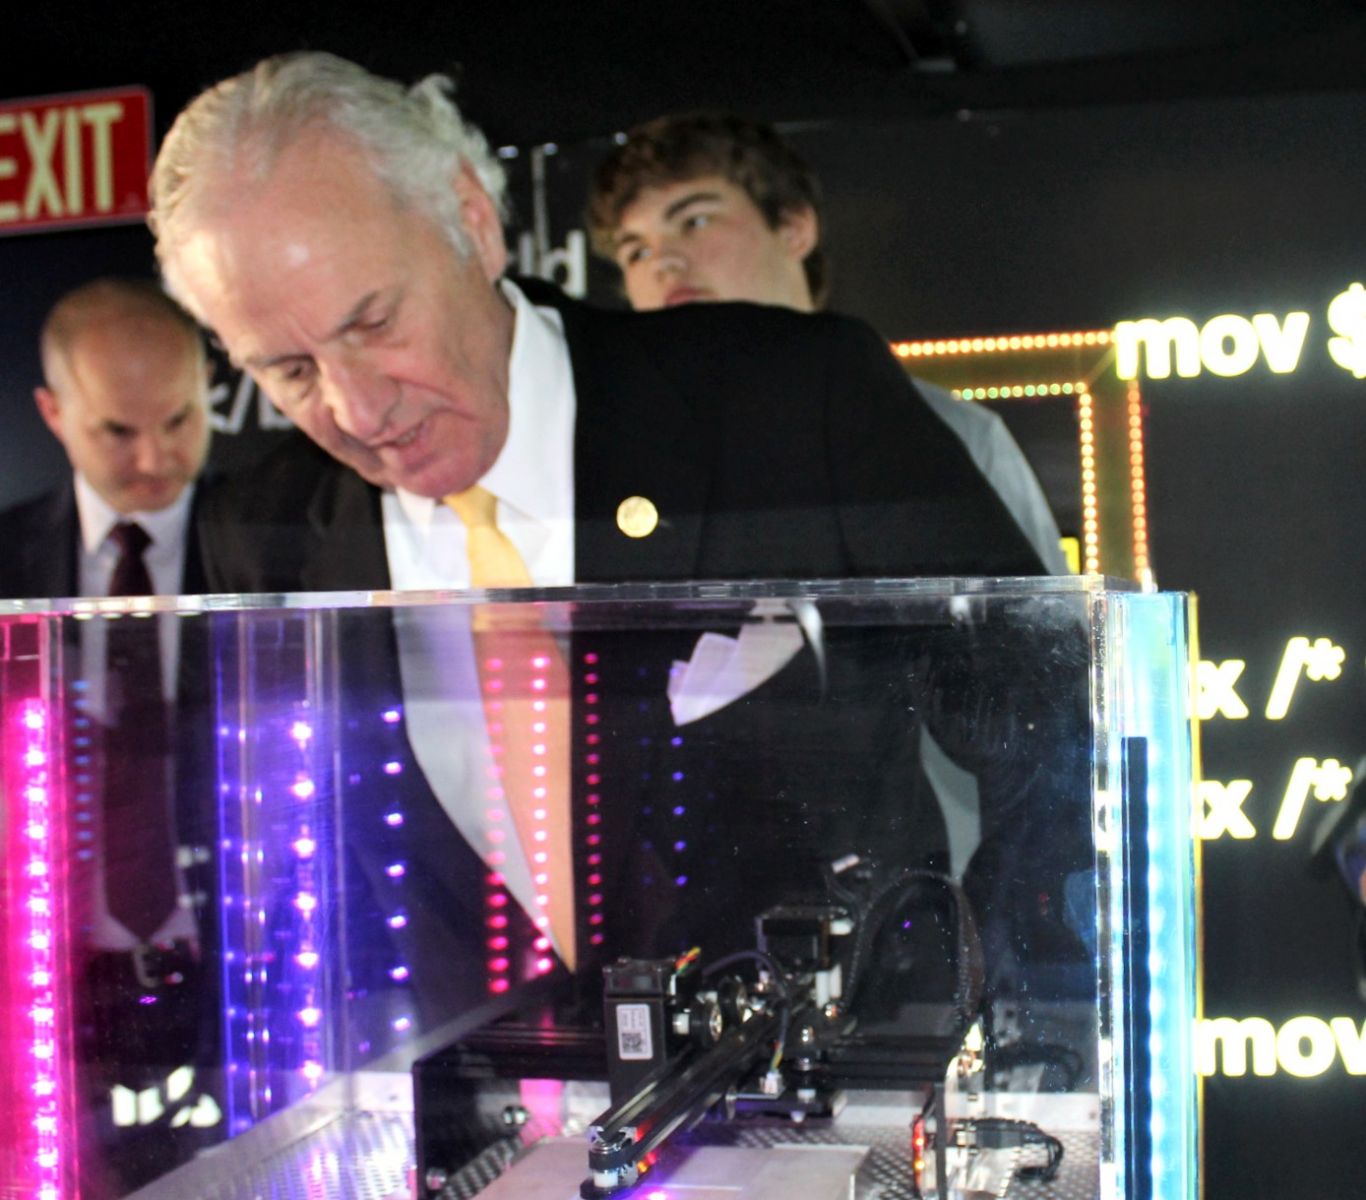 Gov. Henry McMaster checks out an exhibit at the Creators Wanted workforce development event at Nephron. (Photo/Christina Lee Knauss)